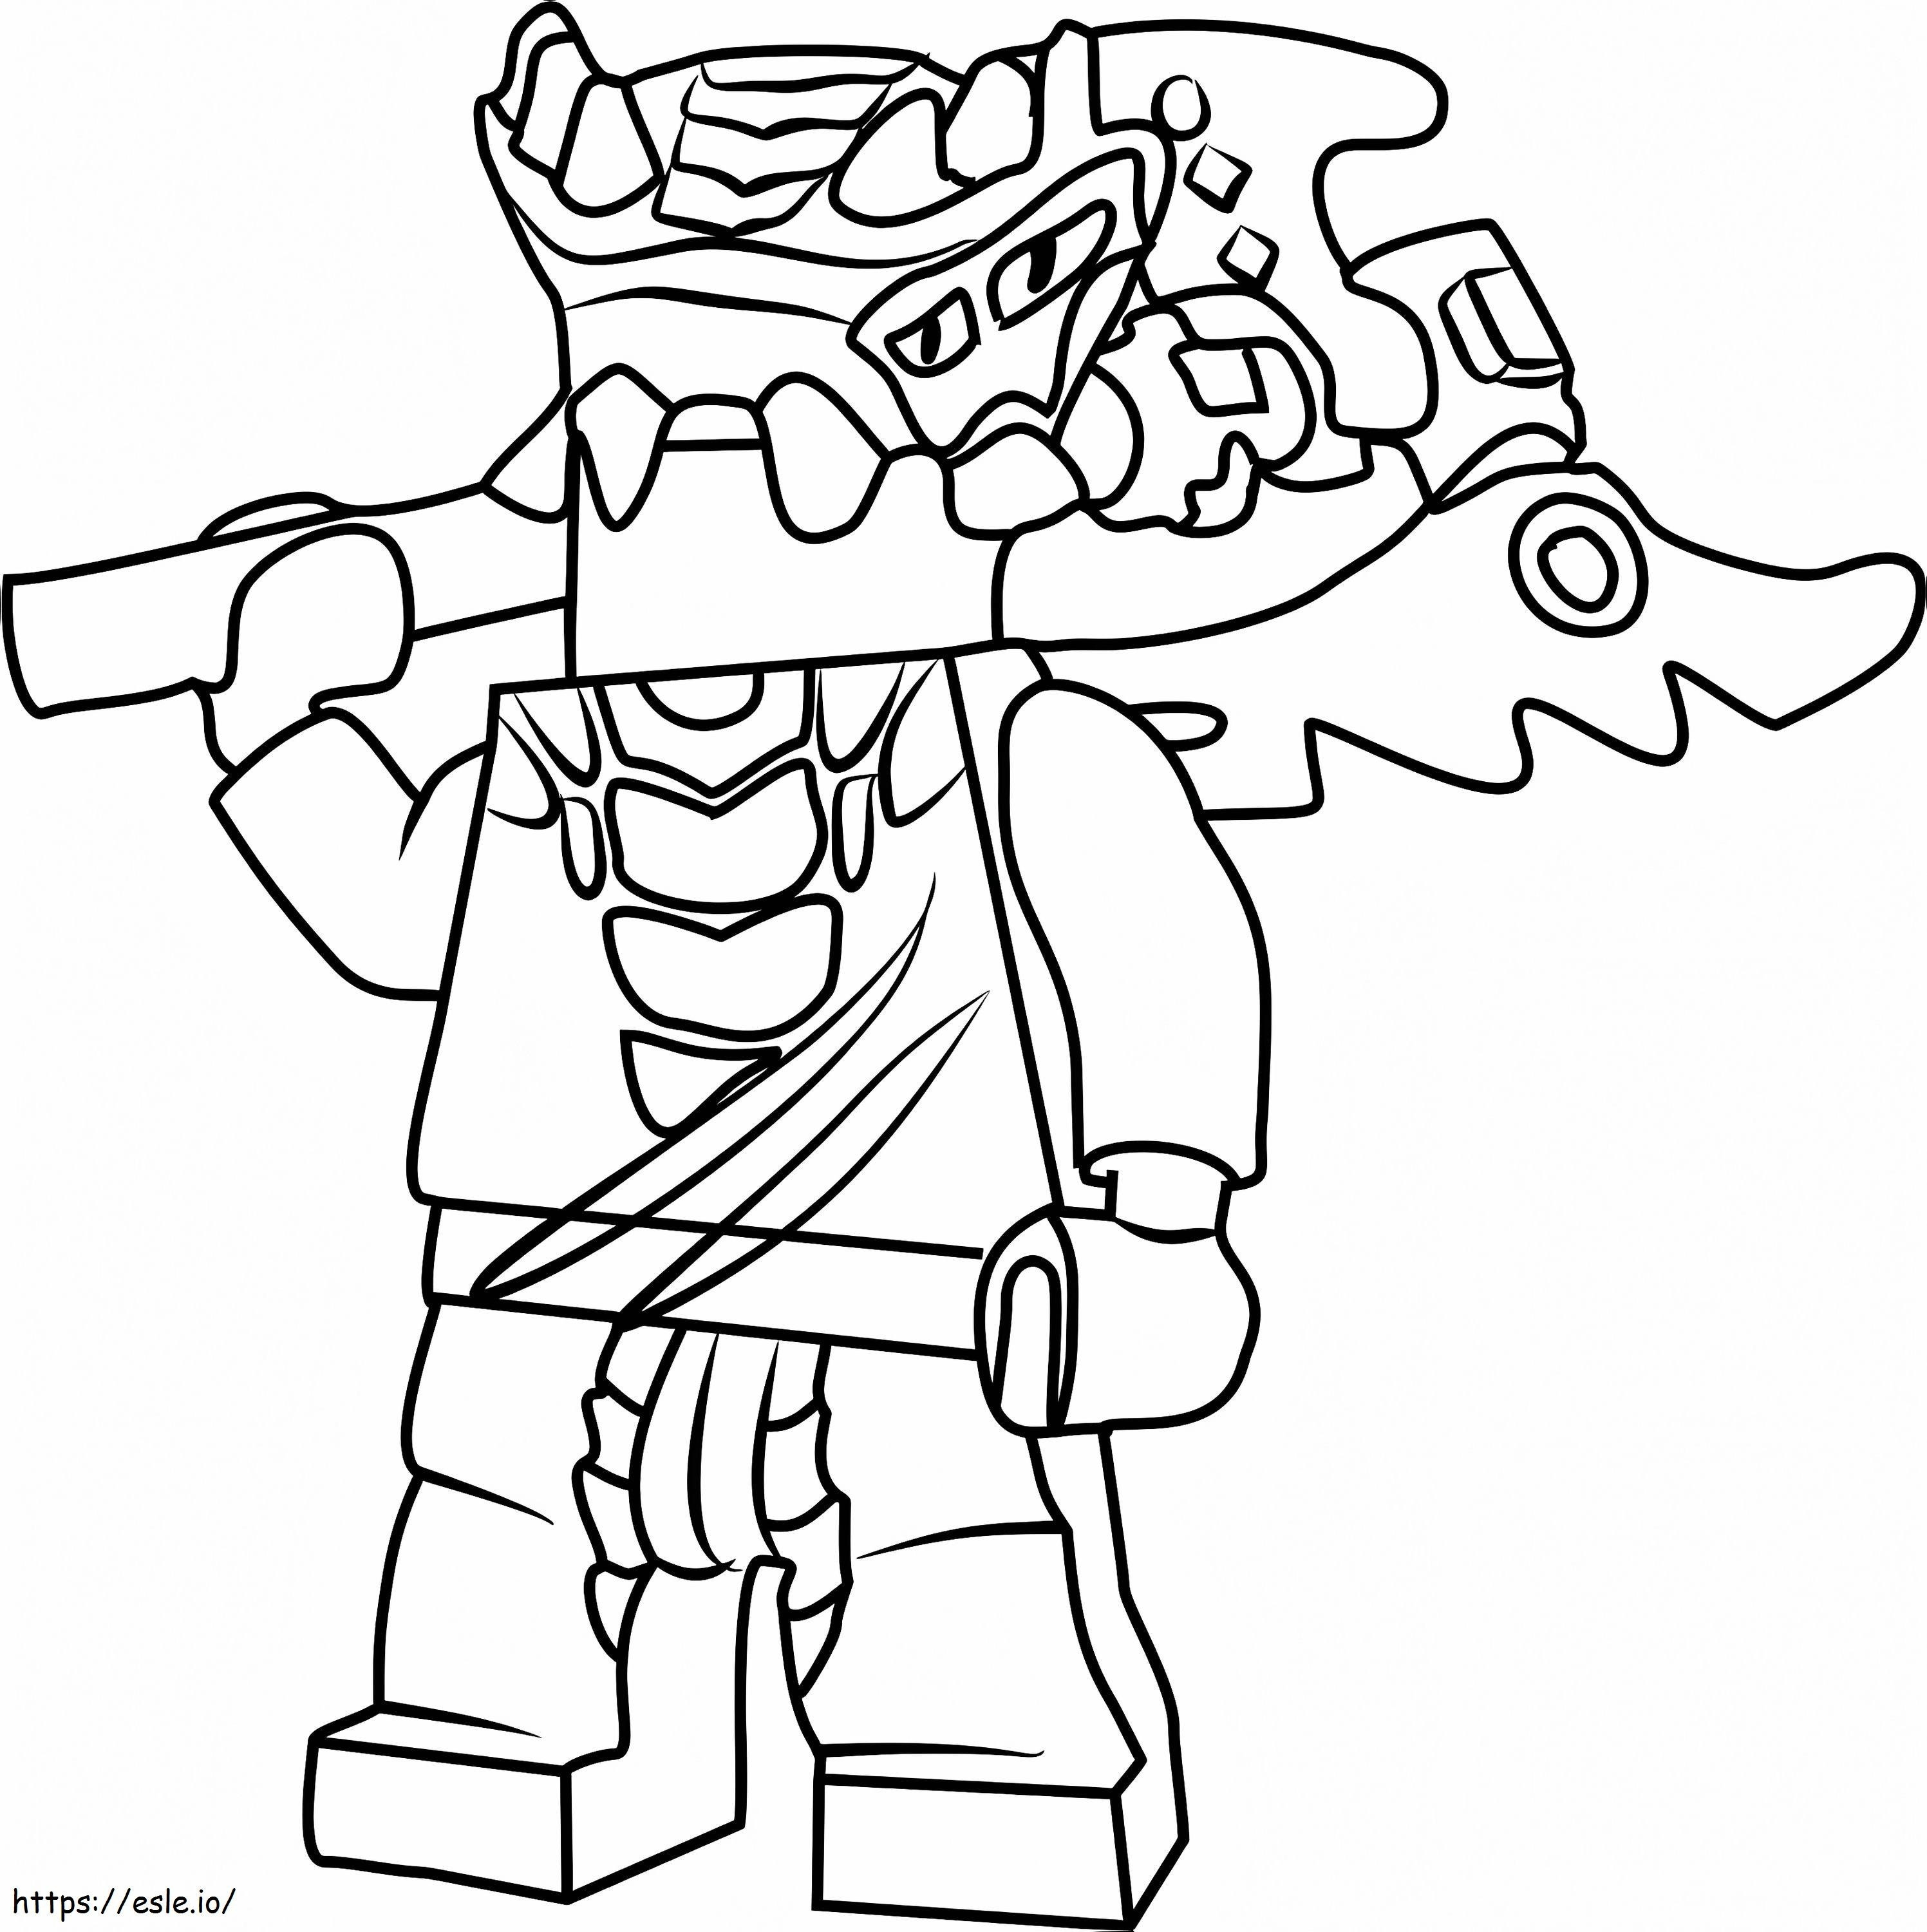 1529722187 18 coloring page